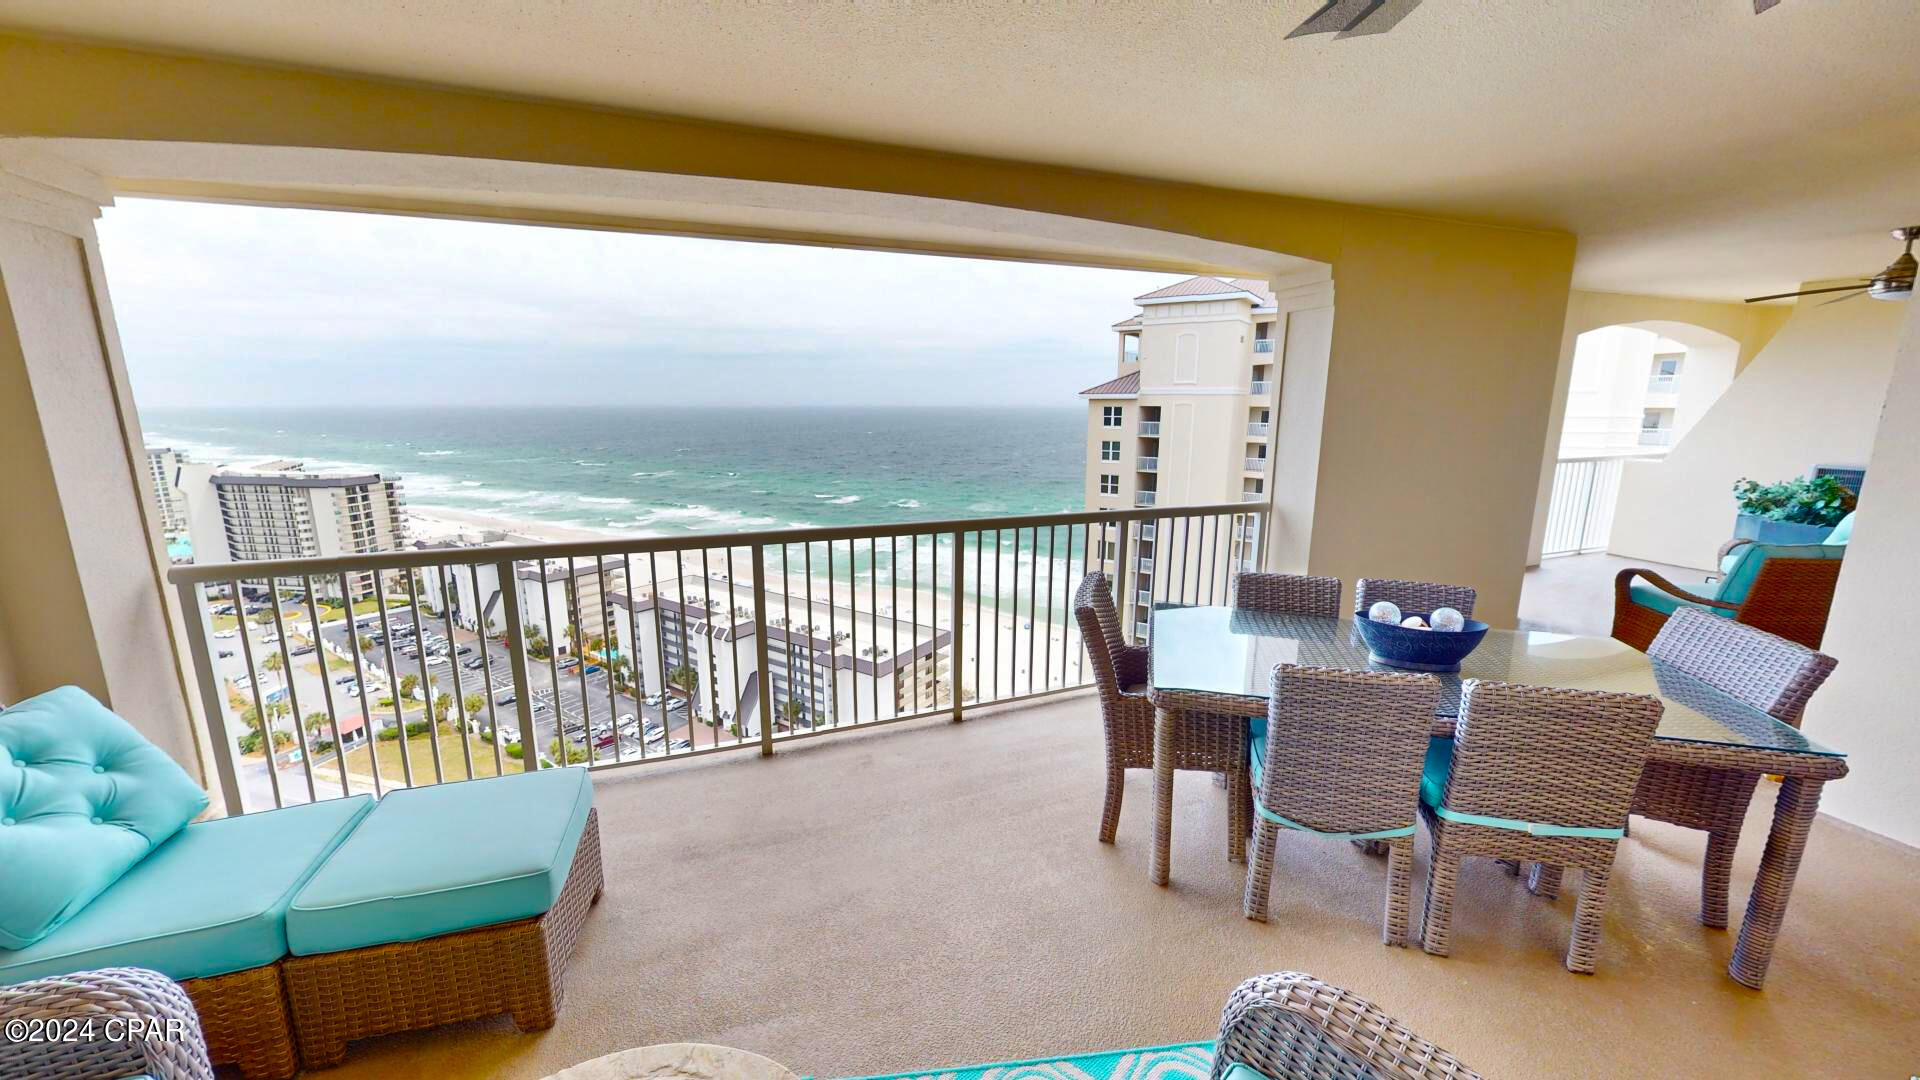 AMAZING  PENTHOUSE !! Priced to sell. Grand Panama Beach Resort! One of the most in demand Resorts in all of Panama City Beach . This immaculate Penthouse is absolutely one of the best. Gorgeous breathtaking water views. Huge balcony. Totally furnished and updated. This a owner occupied unit. Never been on a rental program and it shows. Large open family room. Granite counter tops throughout, stainless appliances. Upgraded furniture. Newer HVAC, new water tank, New stove, Nest smart thermostat. Amenities galore, 2 heated pools, large fitness center. Tiki bar for food and refreshments, Hot tubs and children's pool. Onsite General store, Onsite bistro serving full menu items, Conference room, owners' library. Grand Panama a owner owned Resort. These Penthouses rarely come available.